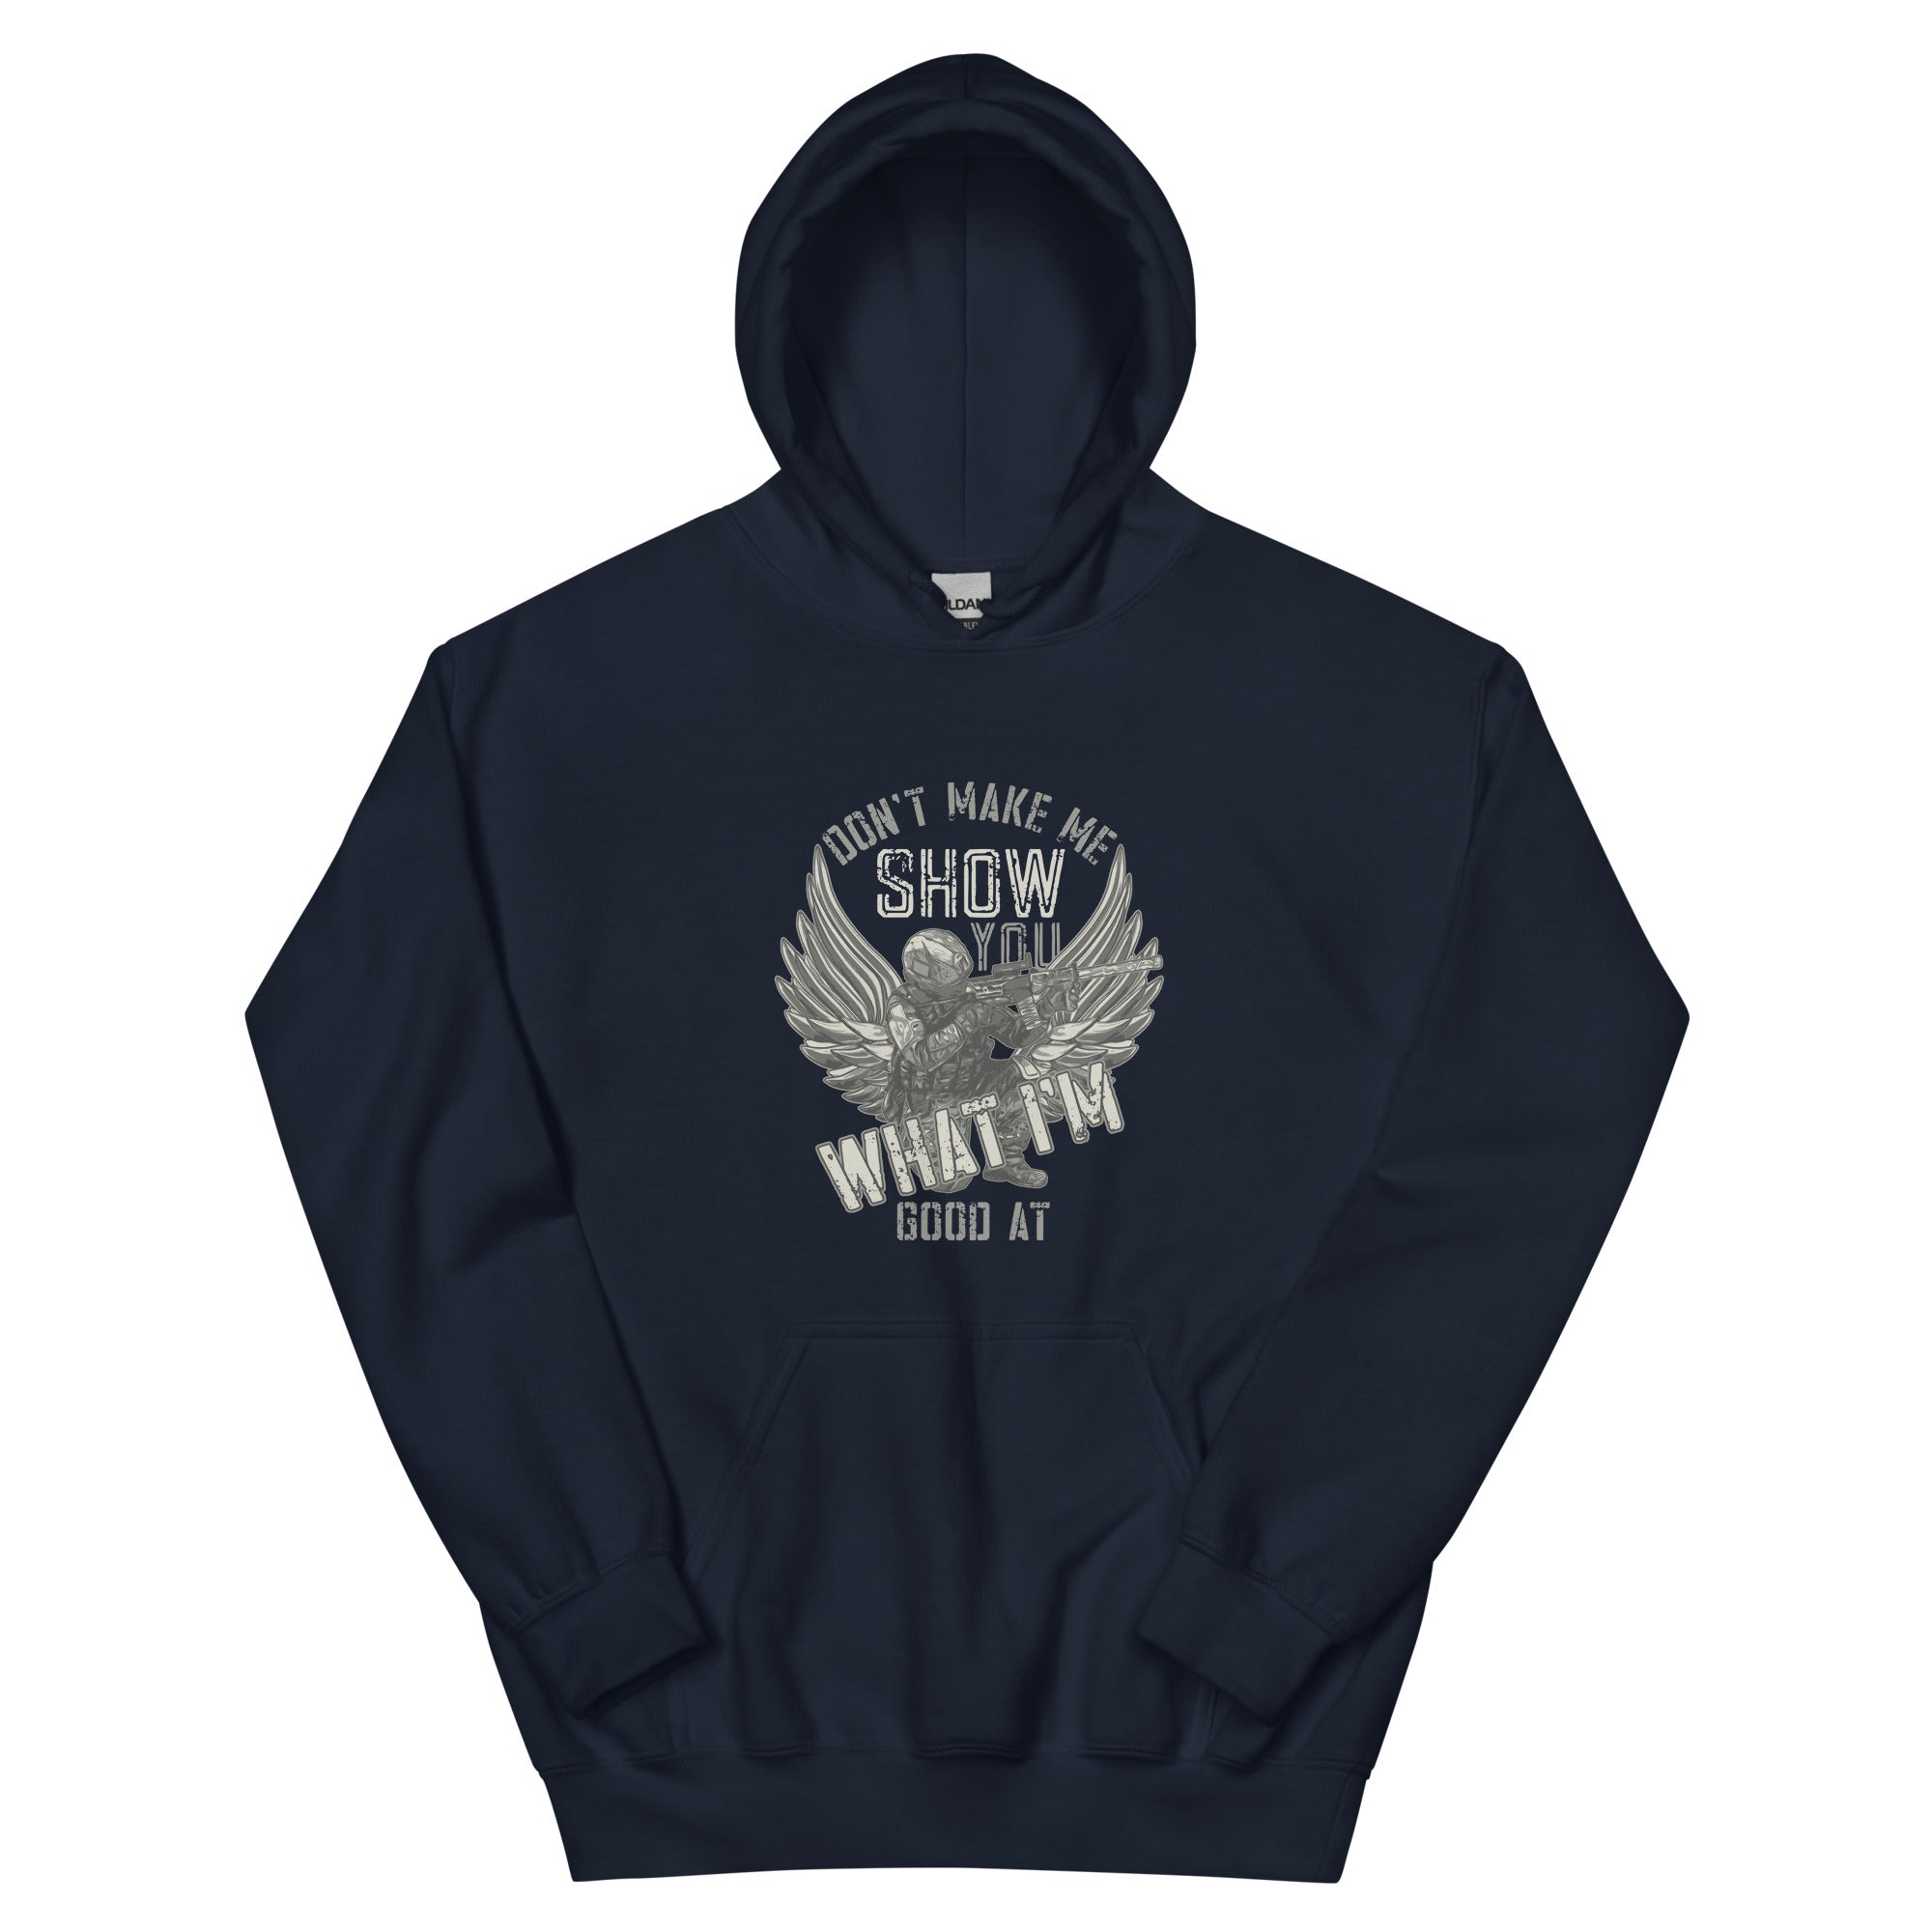 What I'm Good At - Unisex Hoodie